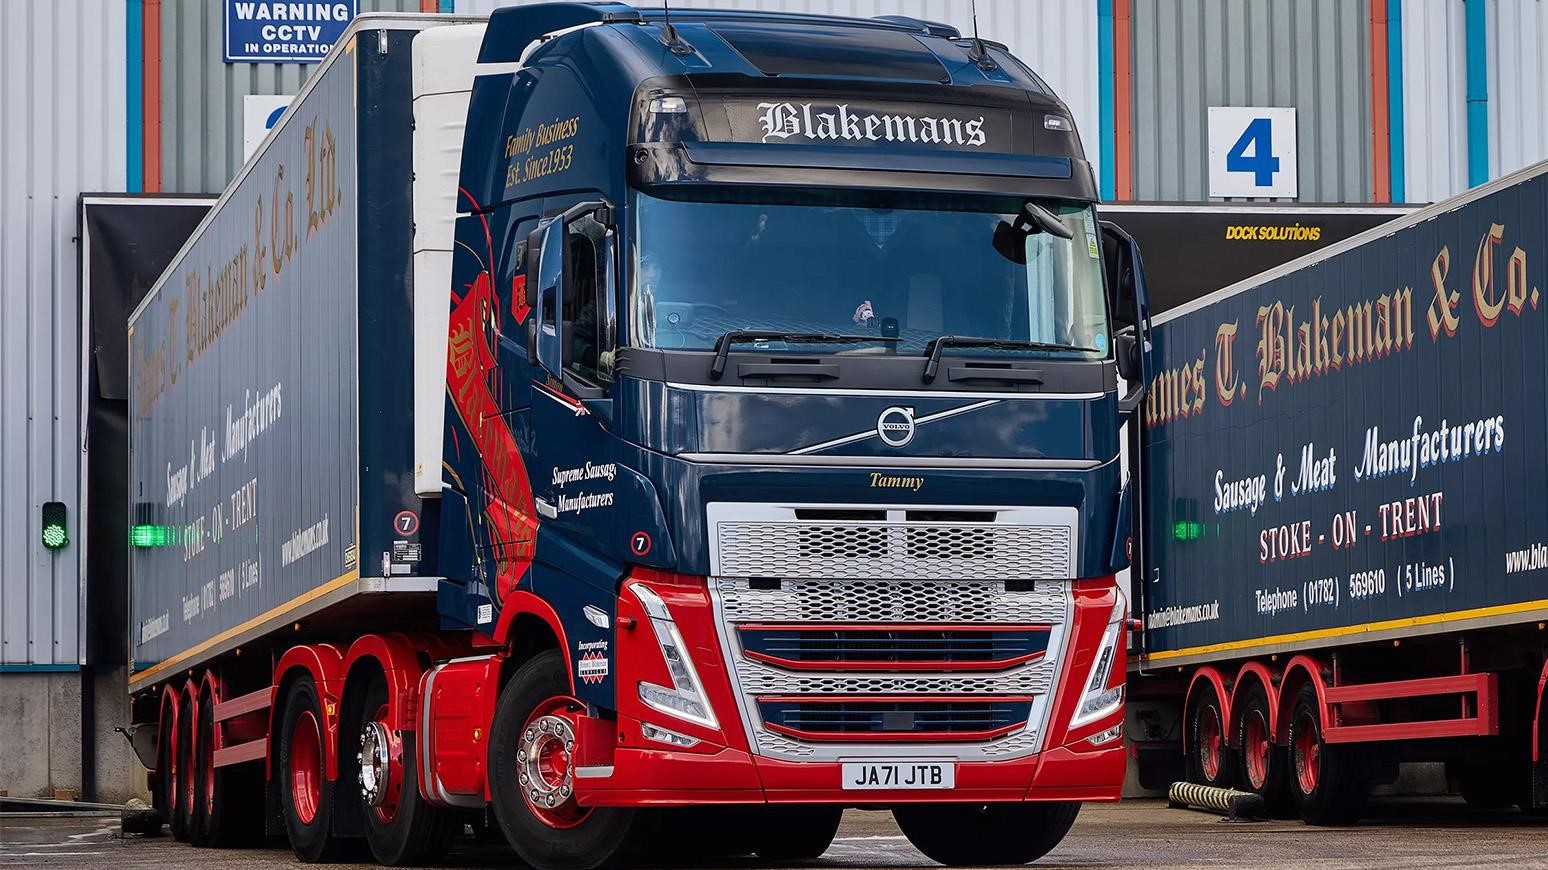 James T Blakeman & Co Replaces 3 More Trucks From Another Marque With Volvo FH Tractor Units—Only One More To Go